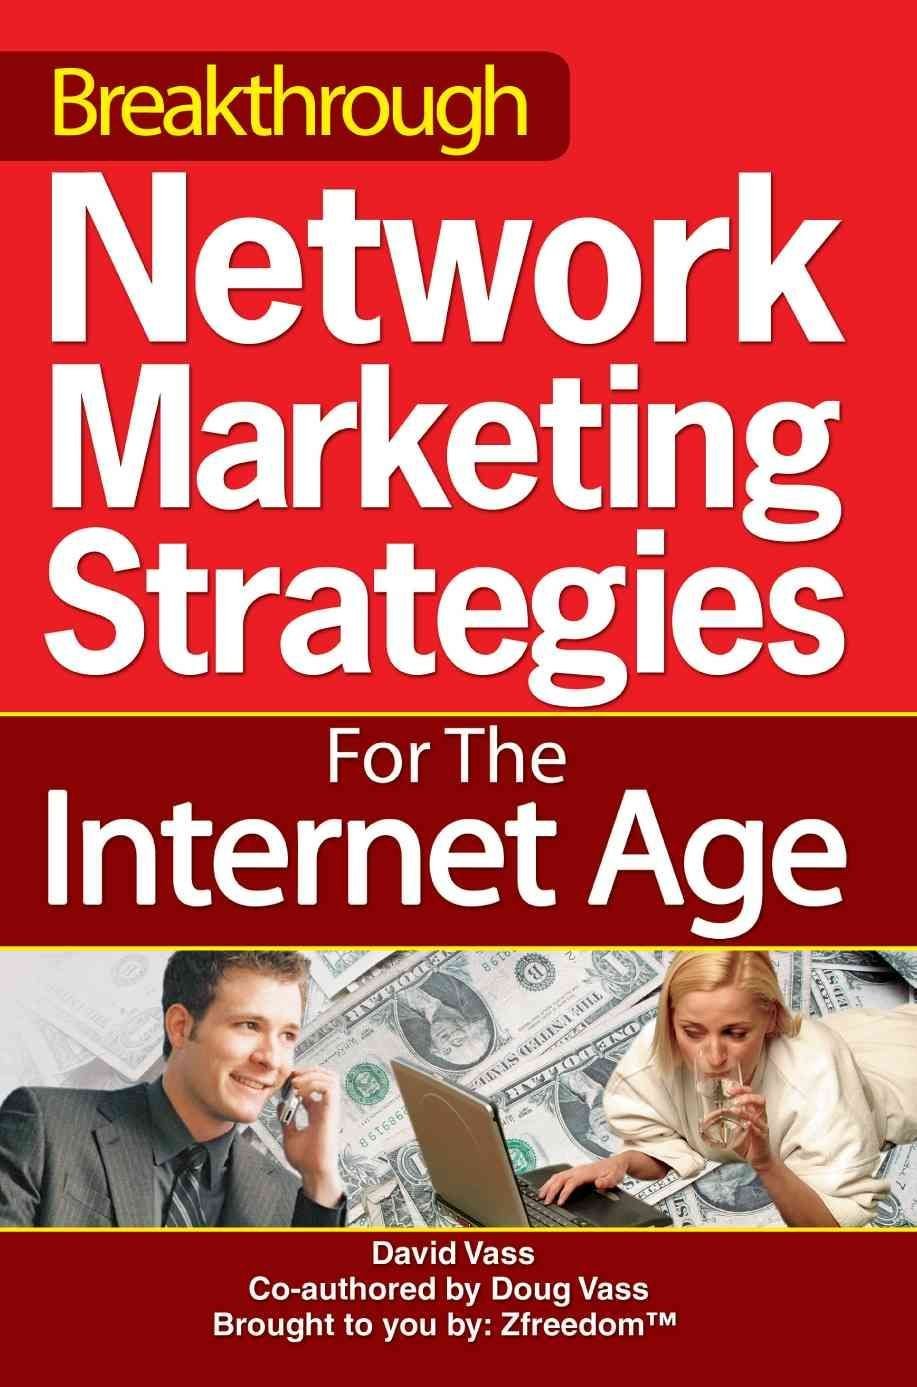 Breakthrough Network Marketing Strategies for the Internet Age